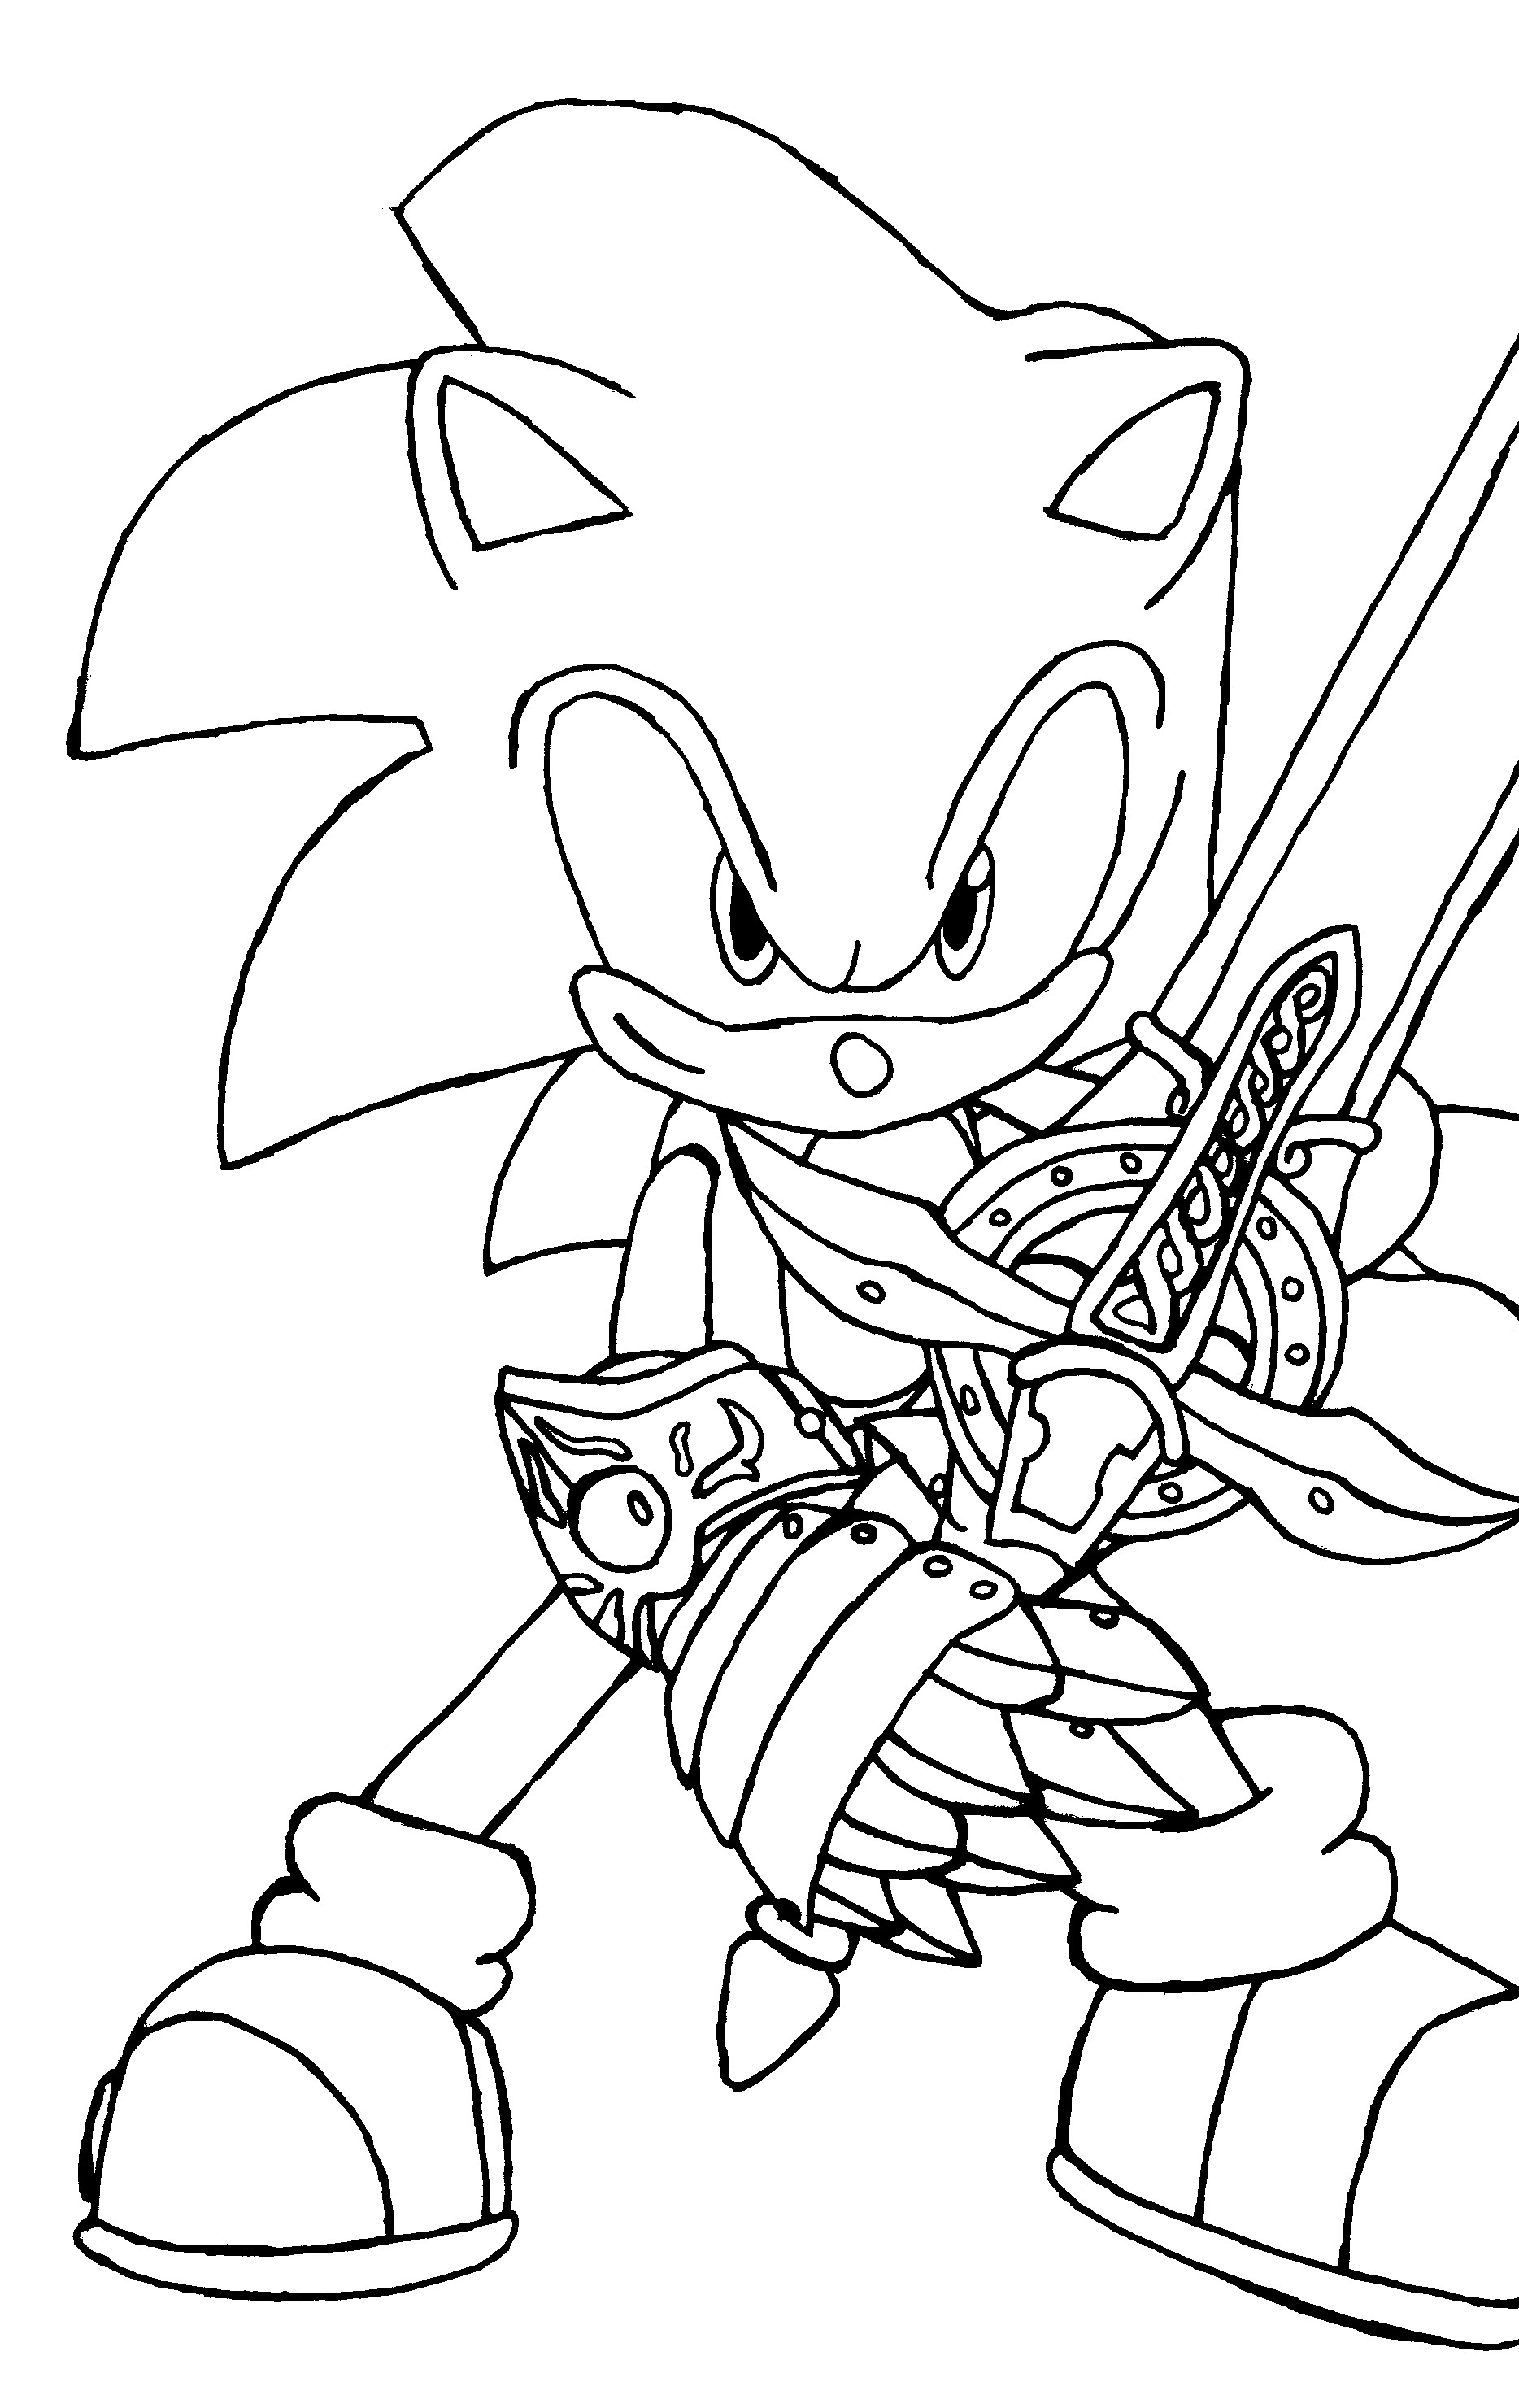  Sonic coloring pages | disney coloring pages for kids | color pages | coloring pages to print | kids coloring pages | #10